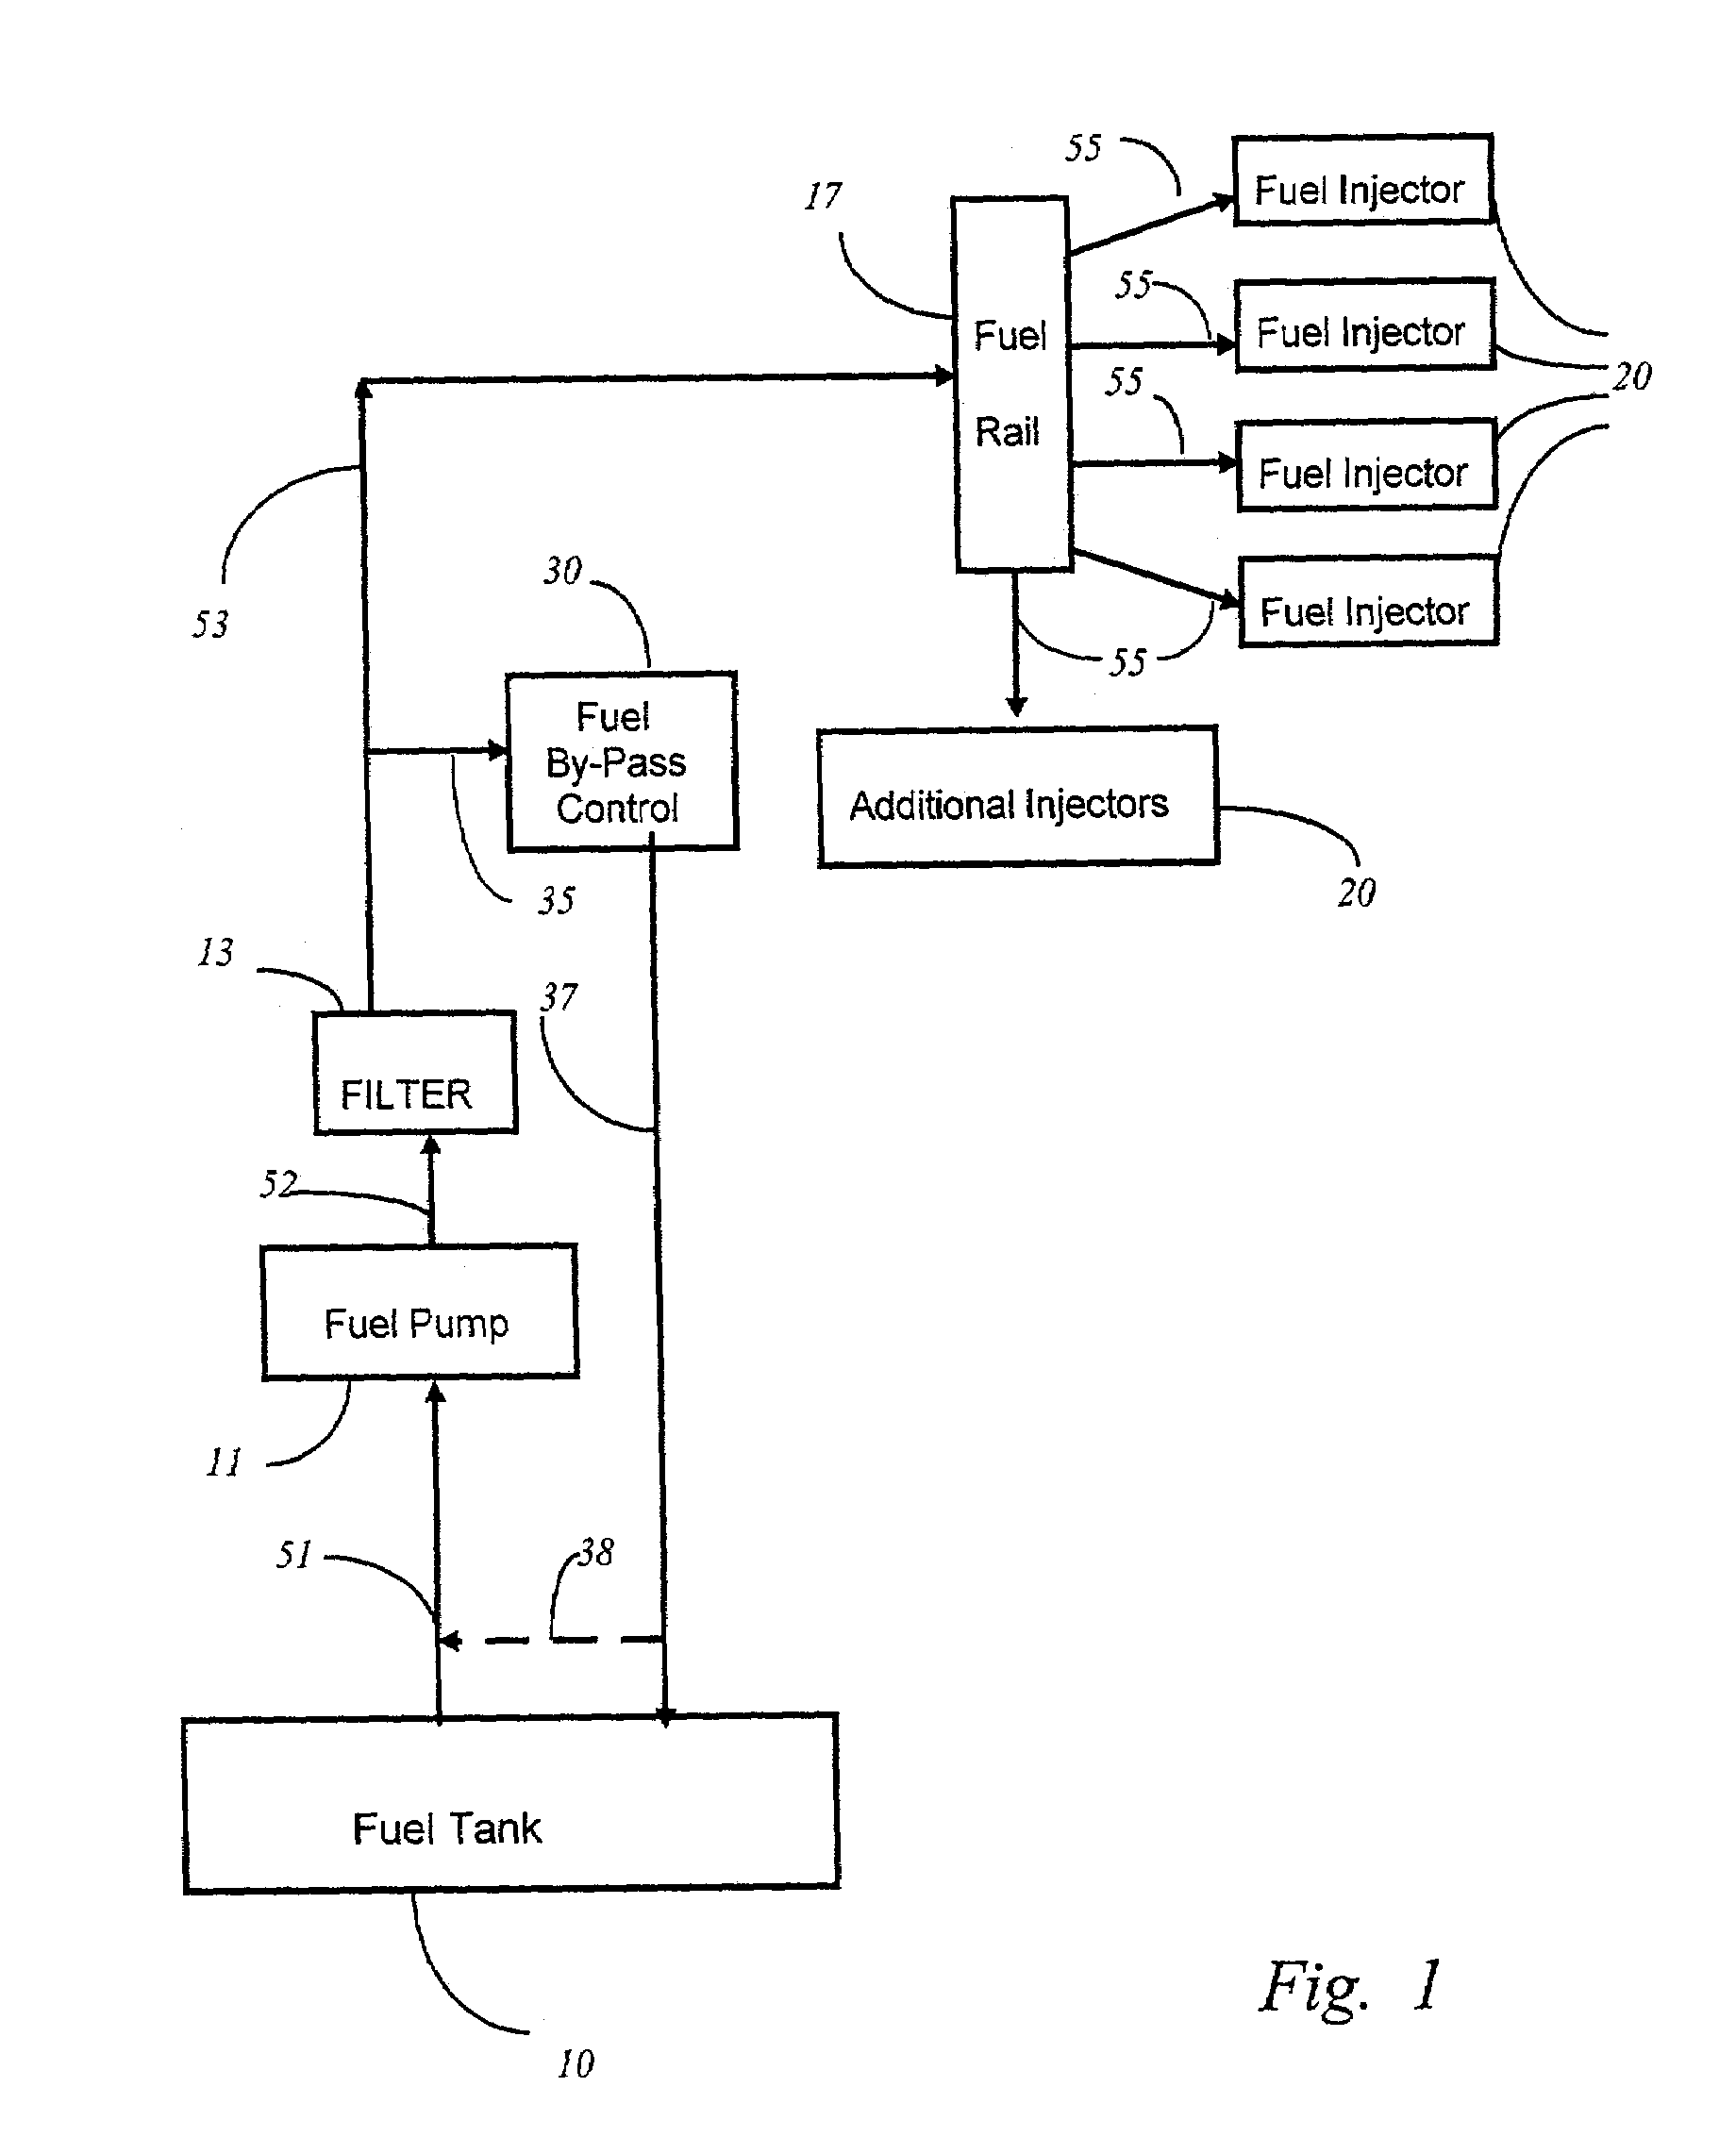 Constant-speed multi-pressure fuel injection system for improved dynamic range in internal combustion engine